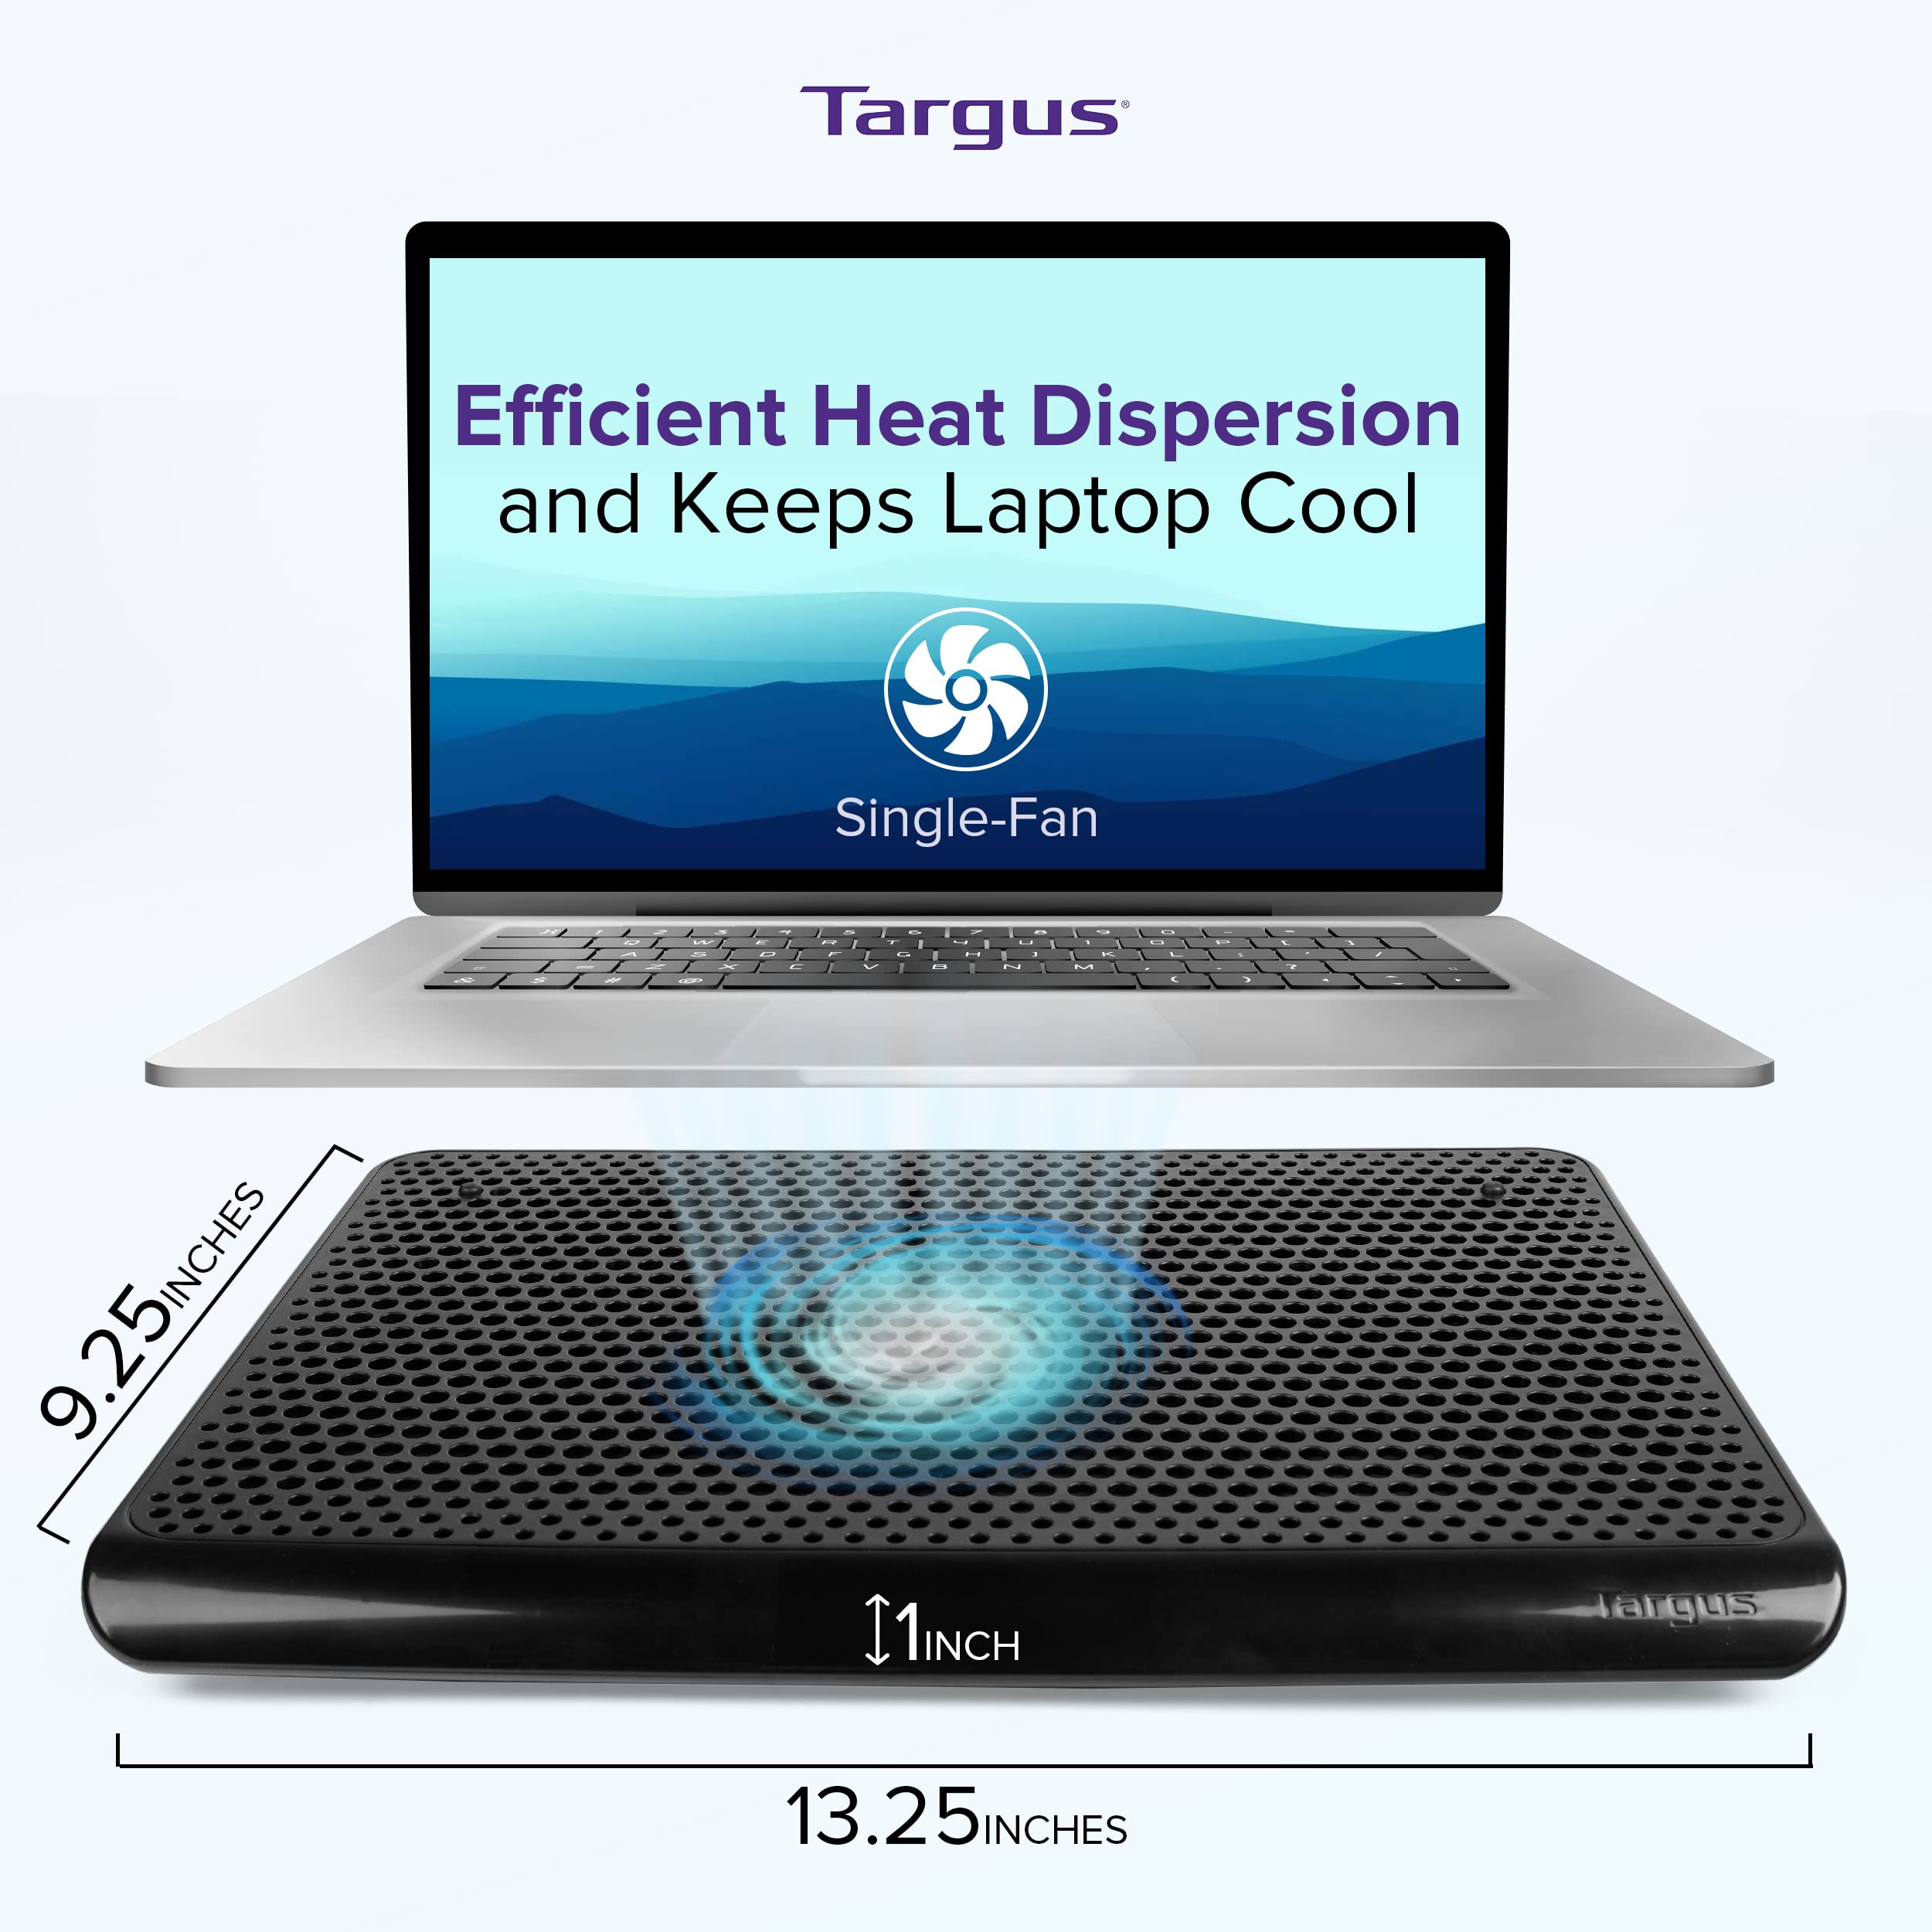 Targus Single Fan Laptop Cooling Pad, Laptop Cooling Stand For Laptops Up To 16 Inches; Laptop Cooling Pad For 15.6 inch Macbook/PC Gaming Or Work Laptop Cooling Pads & External Fans, Black (AWE69US)